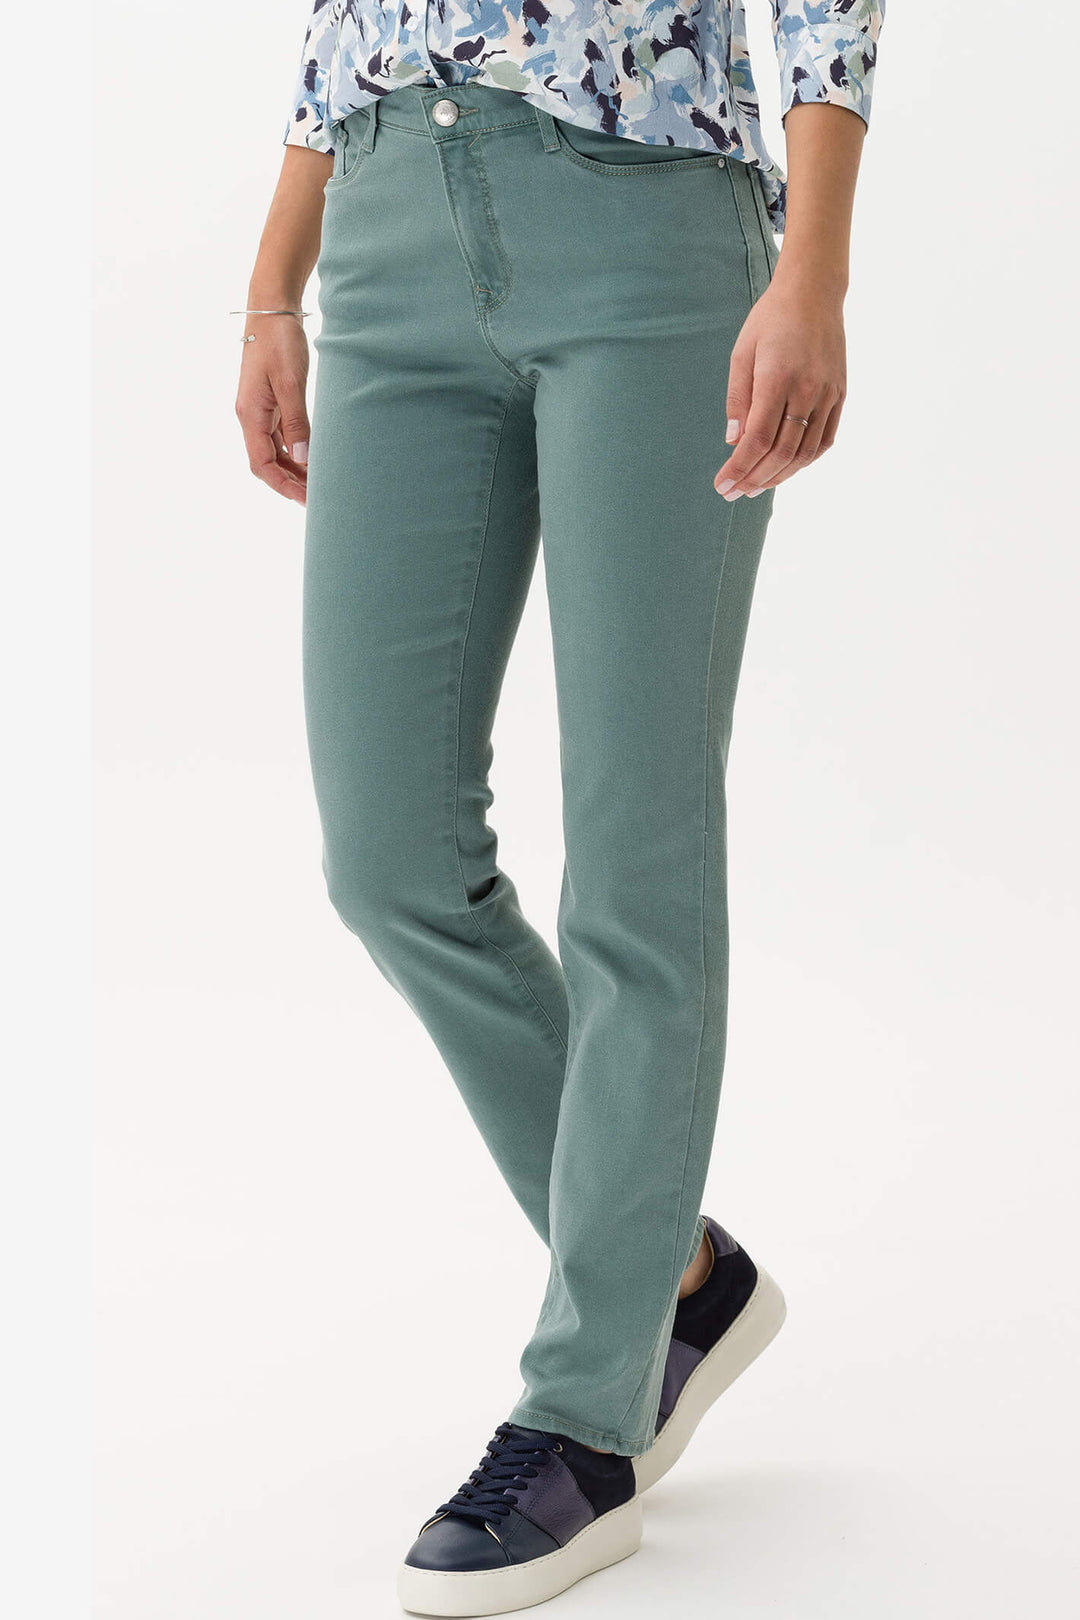 Brax Mary 79-4054 32 Blue Planet Sage Green Slim Fit Jeans - Shirley Allum Boutique